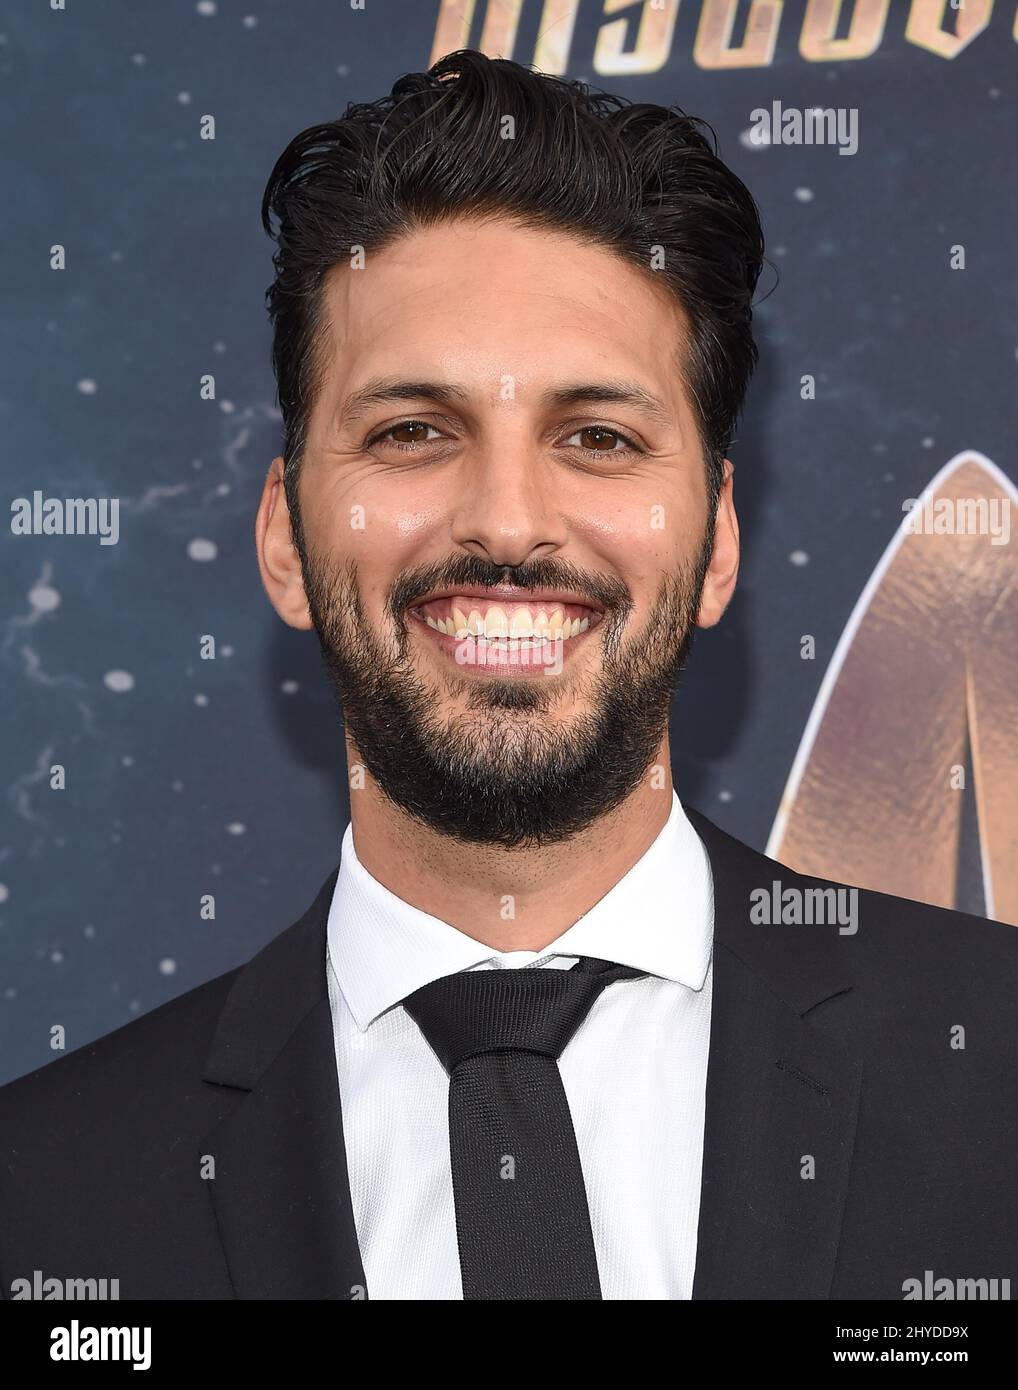 Shazad Latif attending the 'Star Trek: Discovery' Premiere held at the Cinerama Dome Hollywood Stock Photo